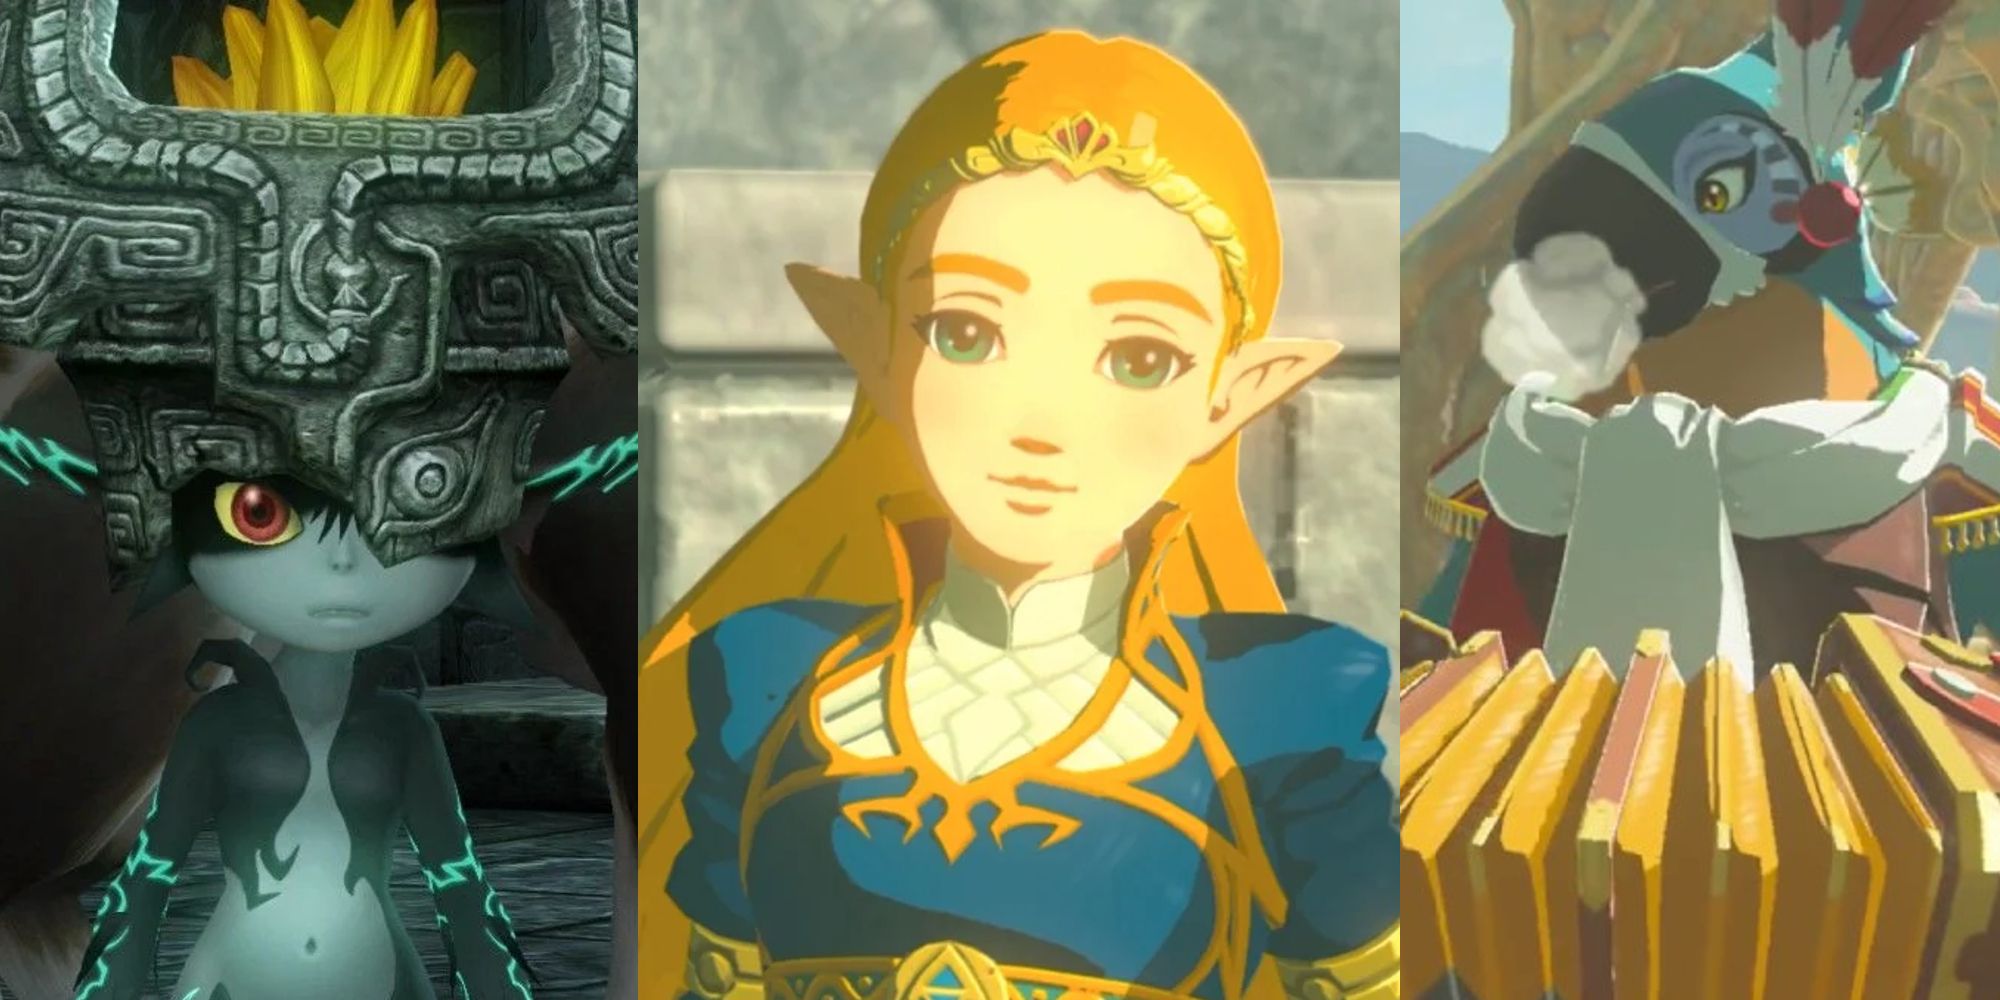 Midna standing in front of Wolf Link in Twilight Princess; Zelda in her royal dress in a Breath of the Wild cutscene; Kass with his accordion at the top of a tower in Hyrule